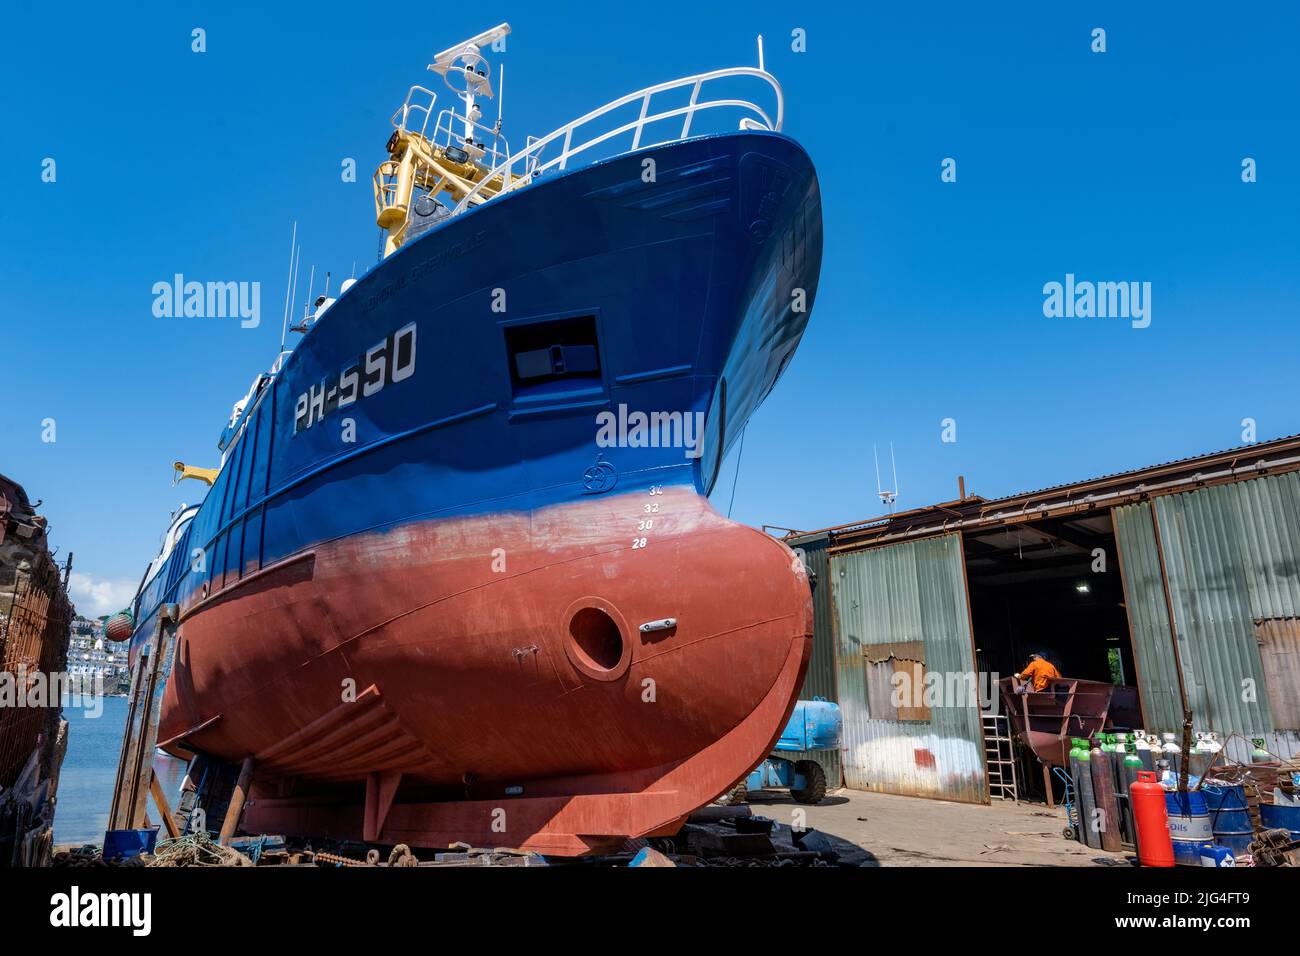 Fishing boat repairs. FV Admiral Grenville on a slipway at Fowey, Cornwall, UK Stock Photo